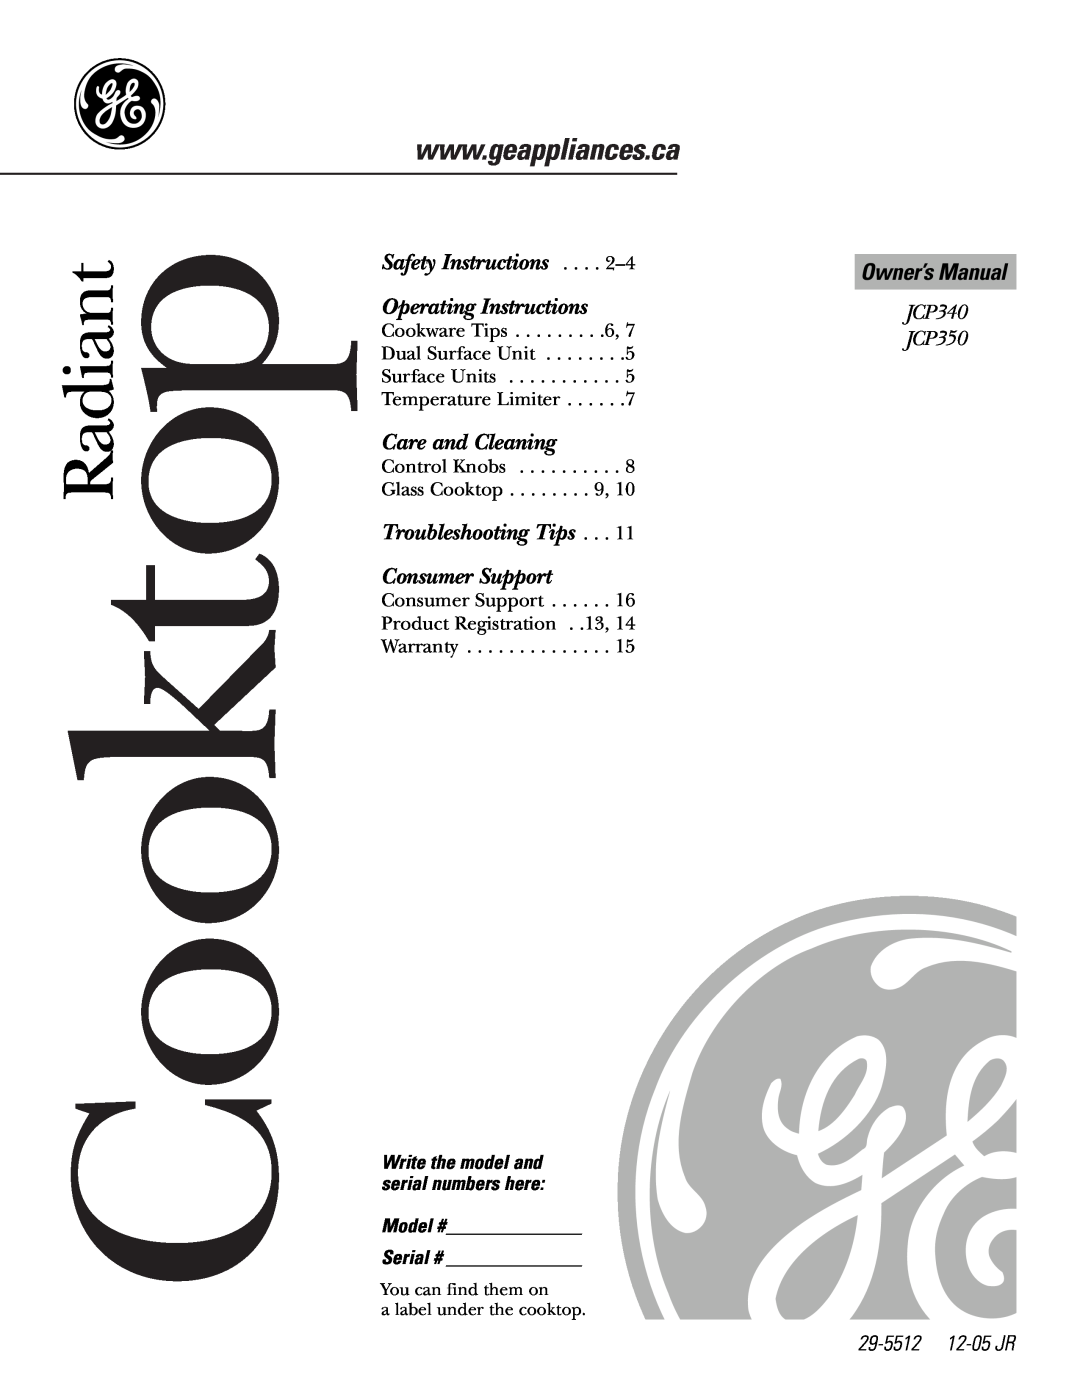 GE owner manual Owner’s Manual, JCP340 JCP350, Model # Serial #, CooktopRadiant, Care and Cleaning, 29-5512 12-05 JR 